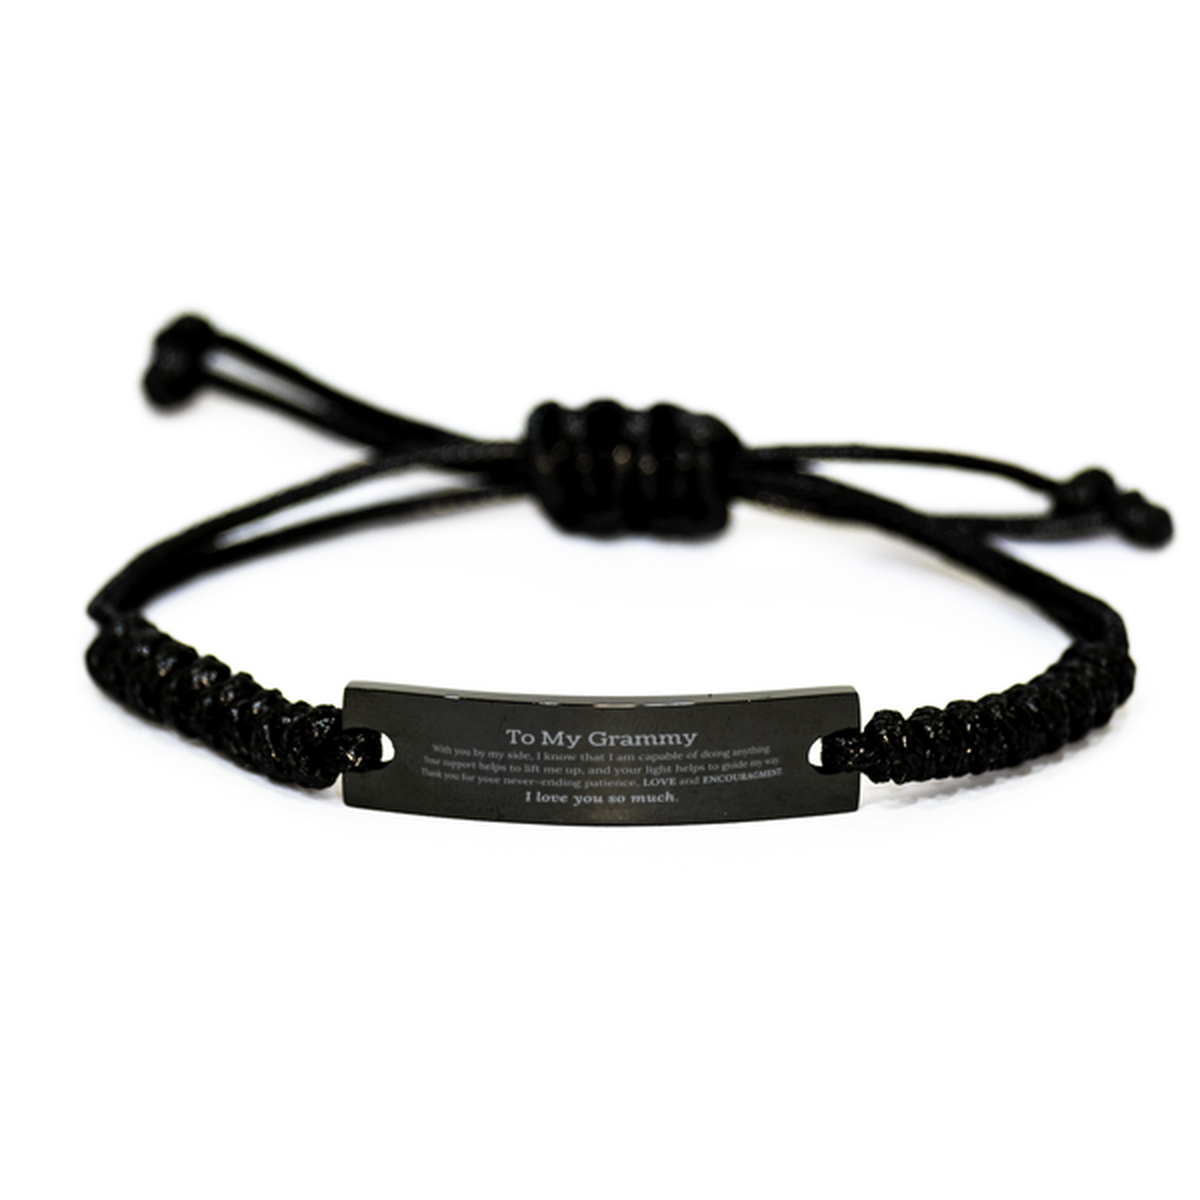 Appreciation Grammy Black Rope Bracelet Gifts, To My Grammy Birthday Christmas Wedding Keepsake Gifts for Grammy With you by my side, I know that I am capable of doing anything. I love you so much